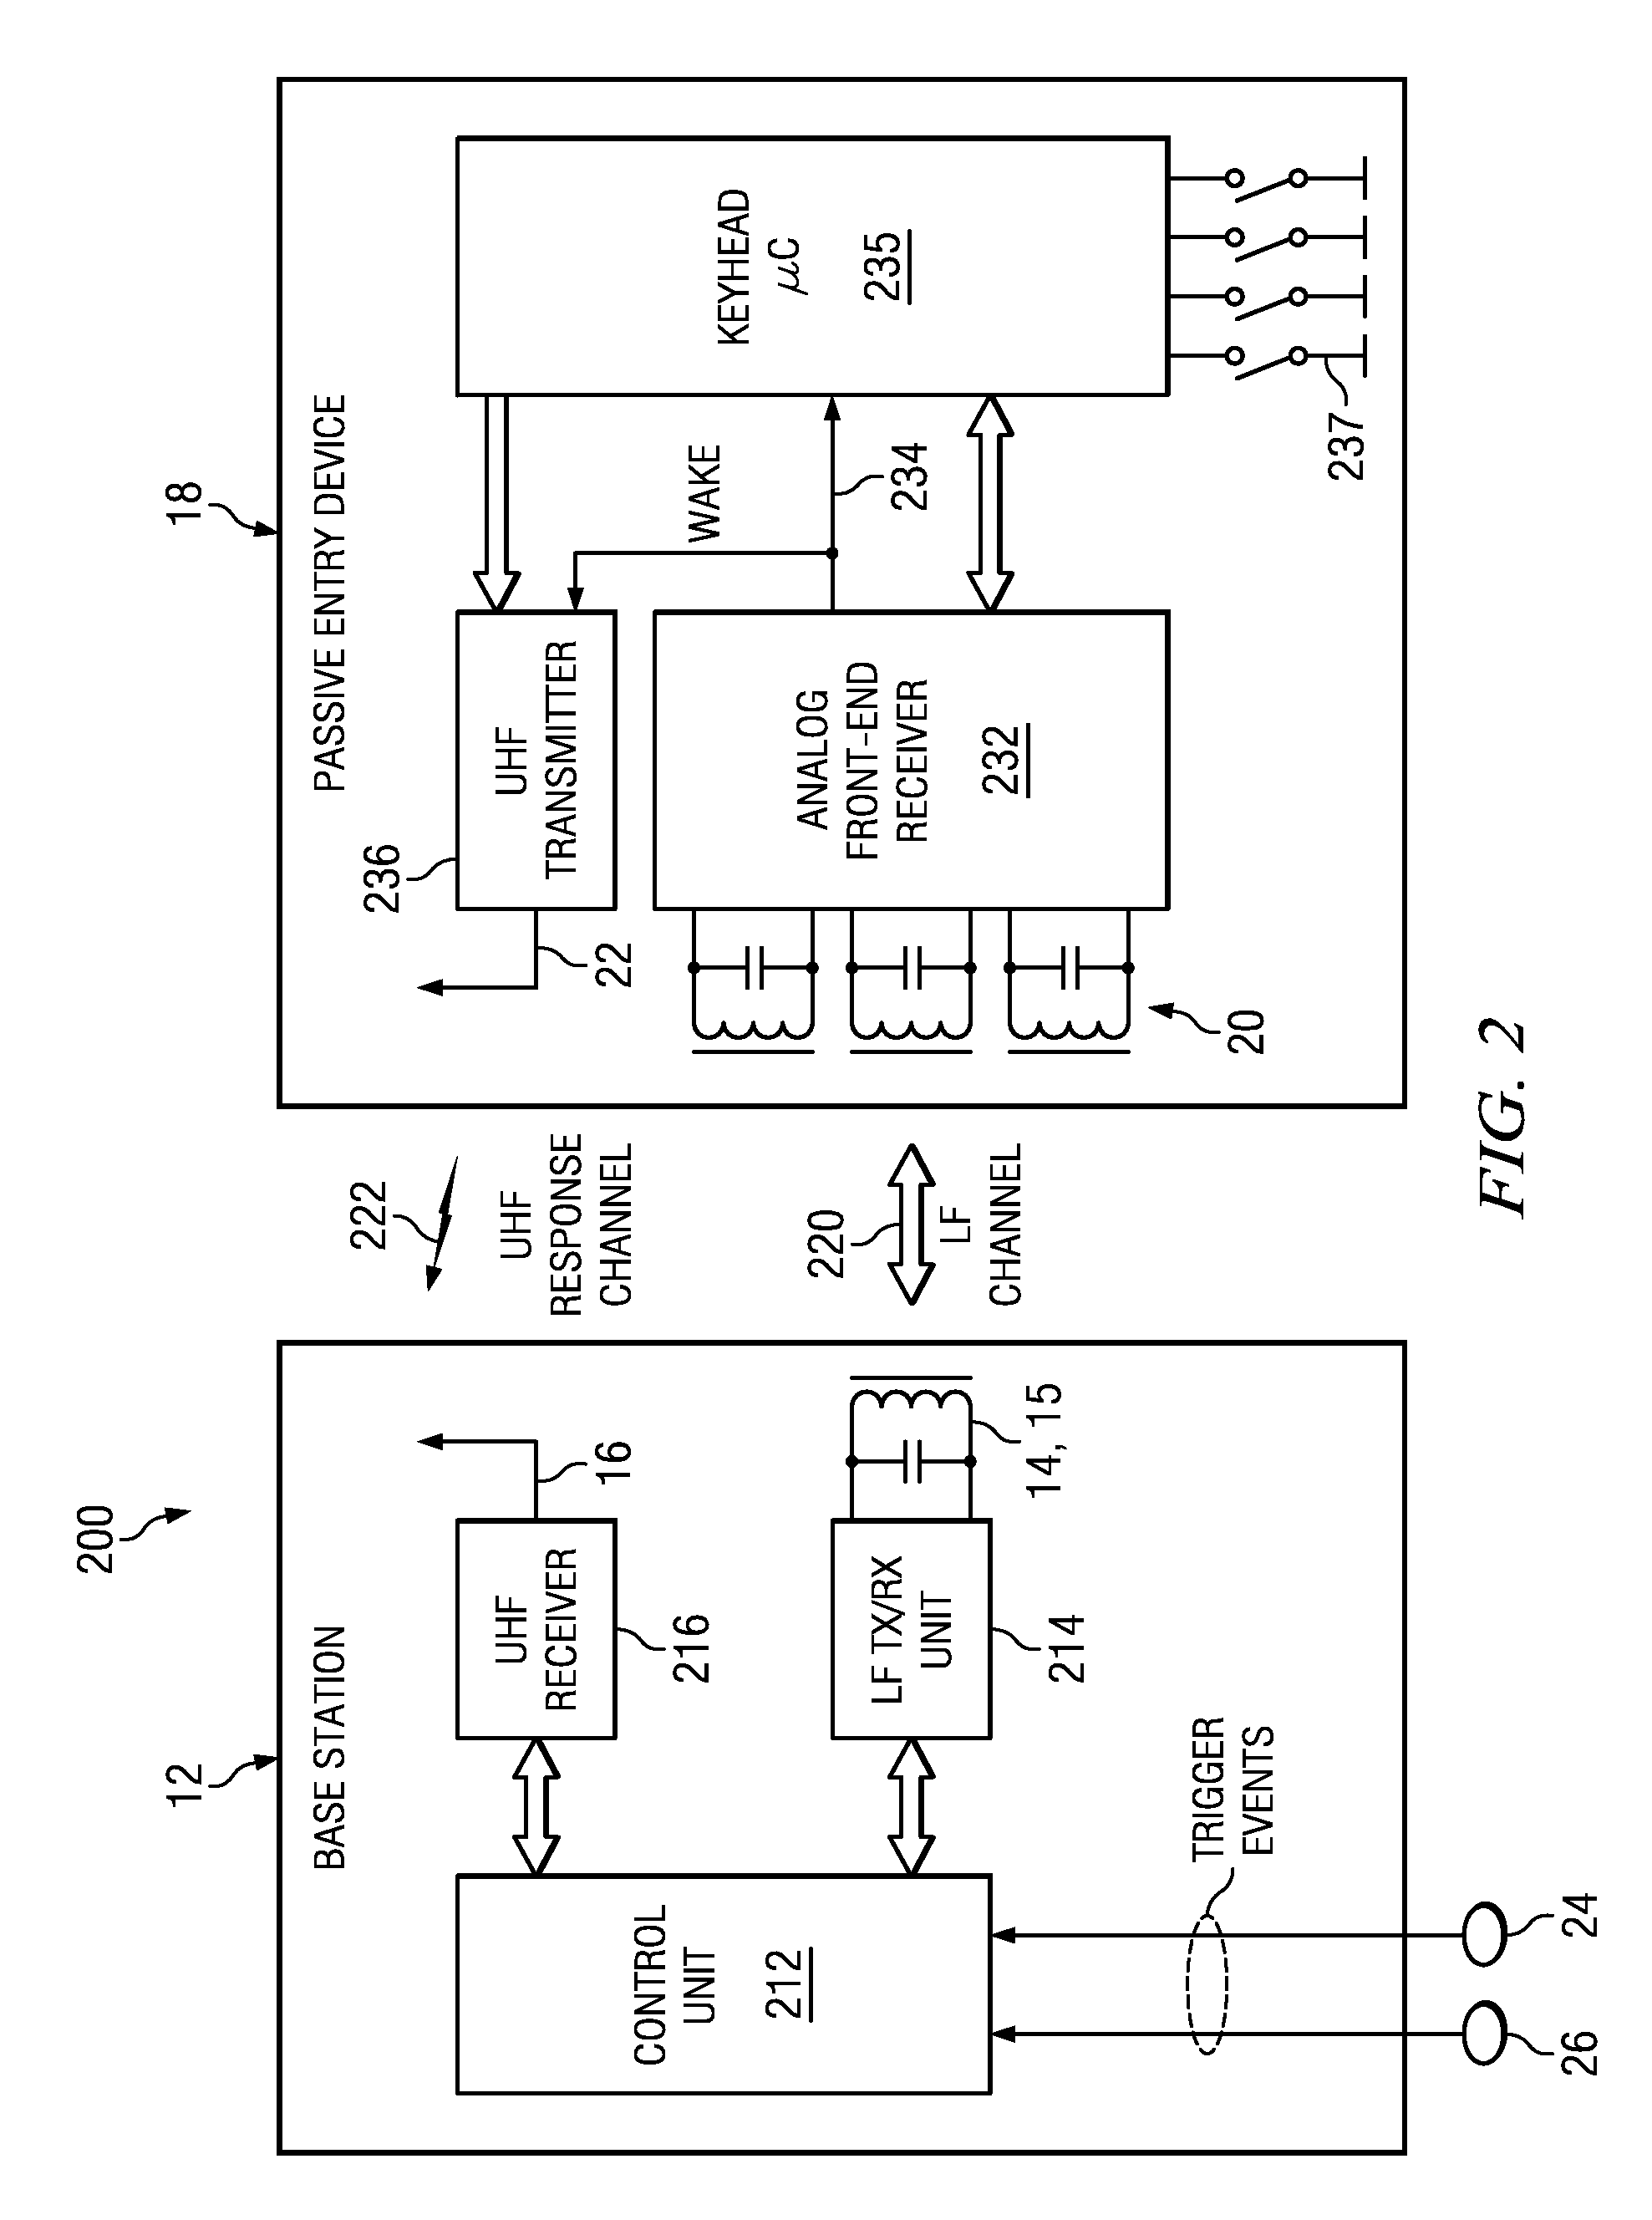 Wake Channel Indication for Passive Entry System